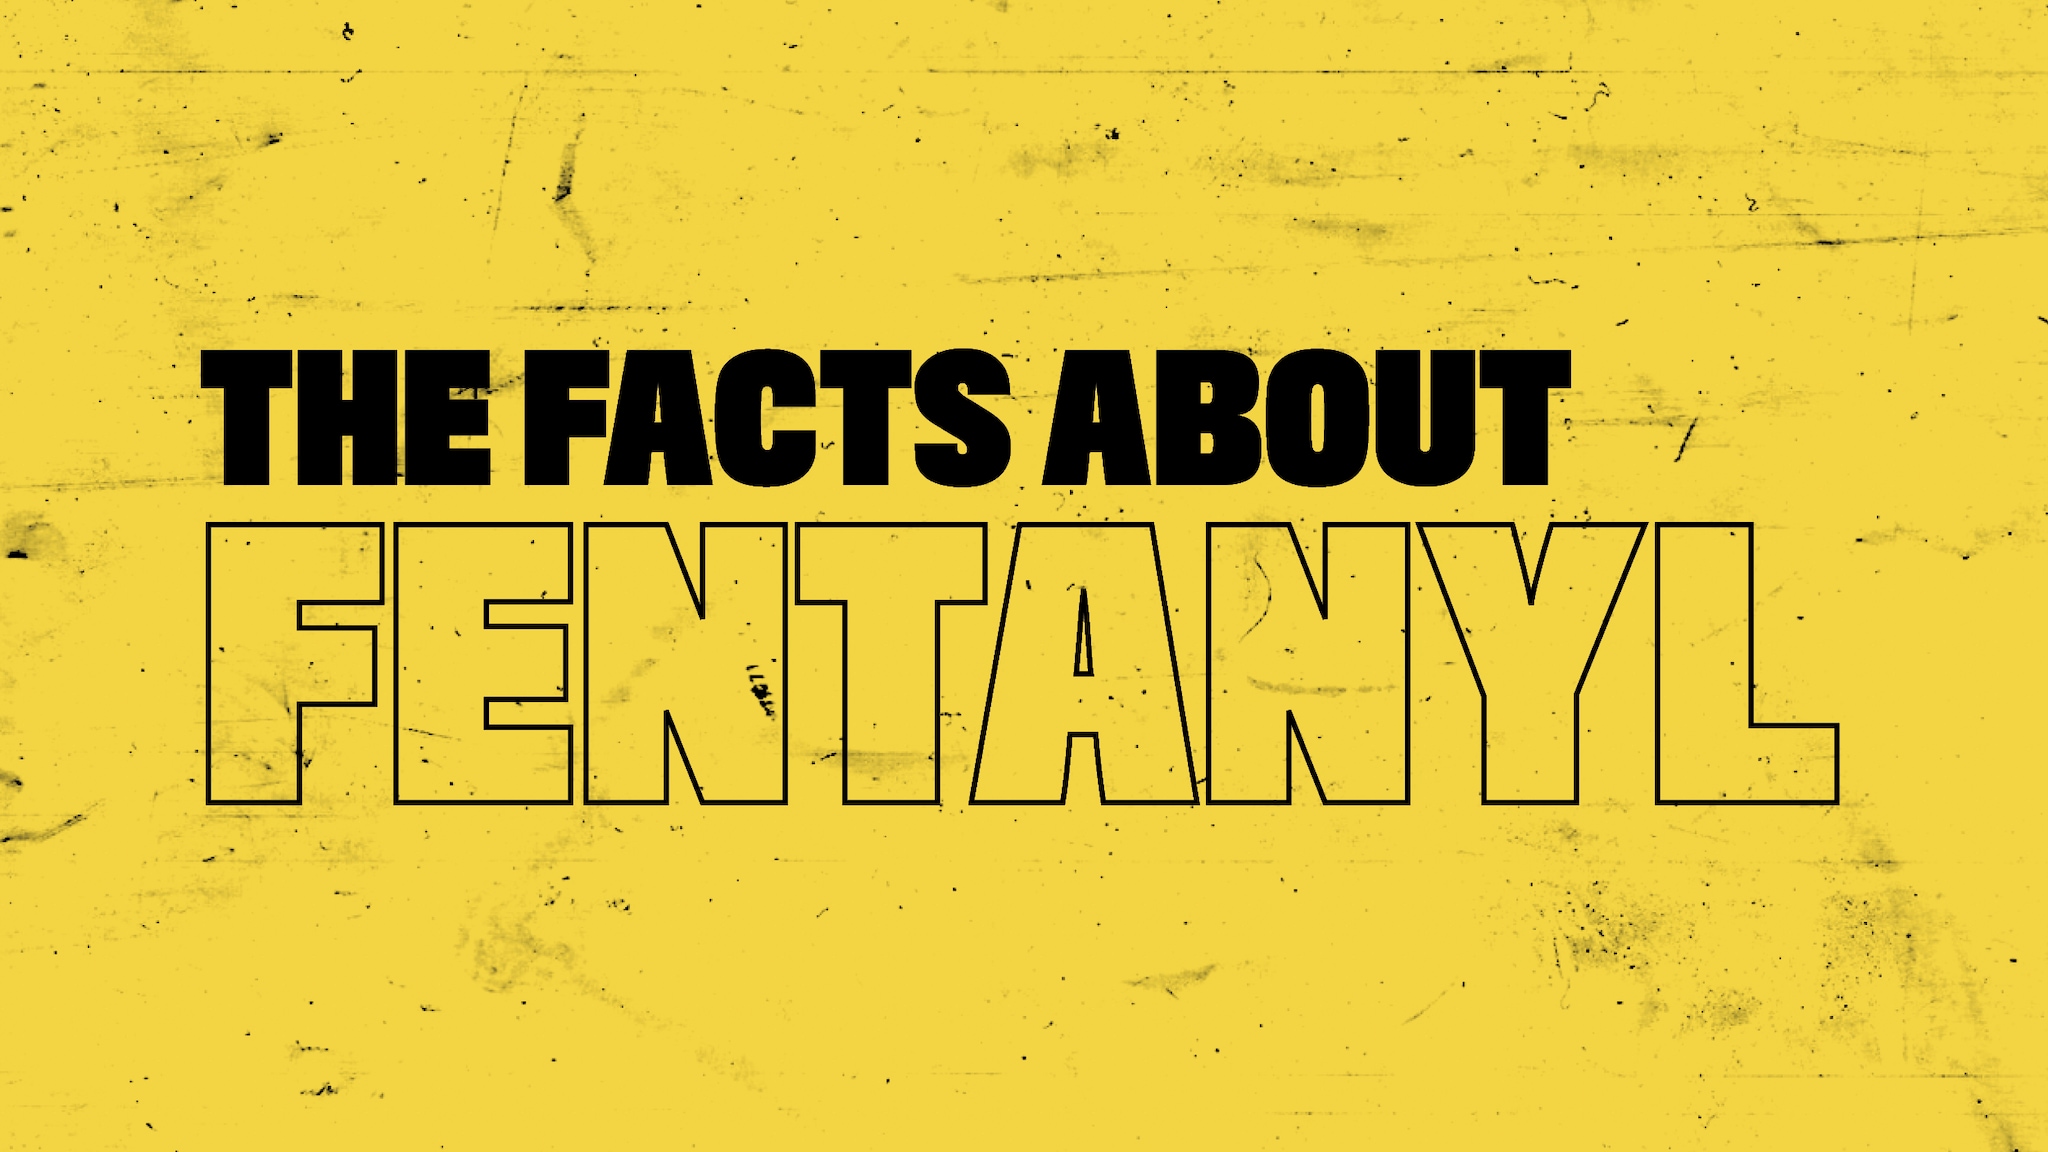 facts on fentanyl